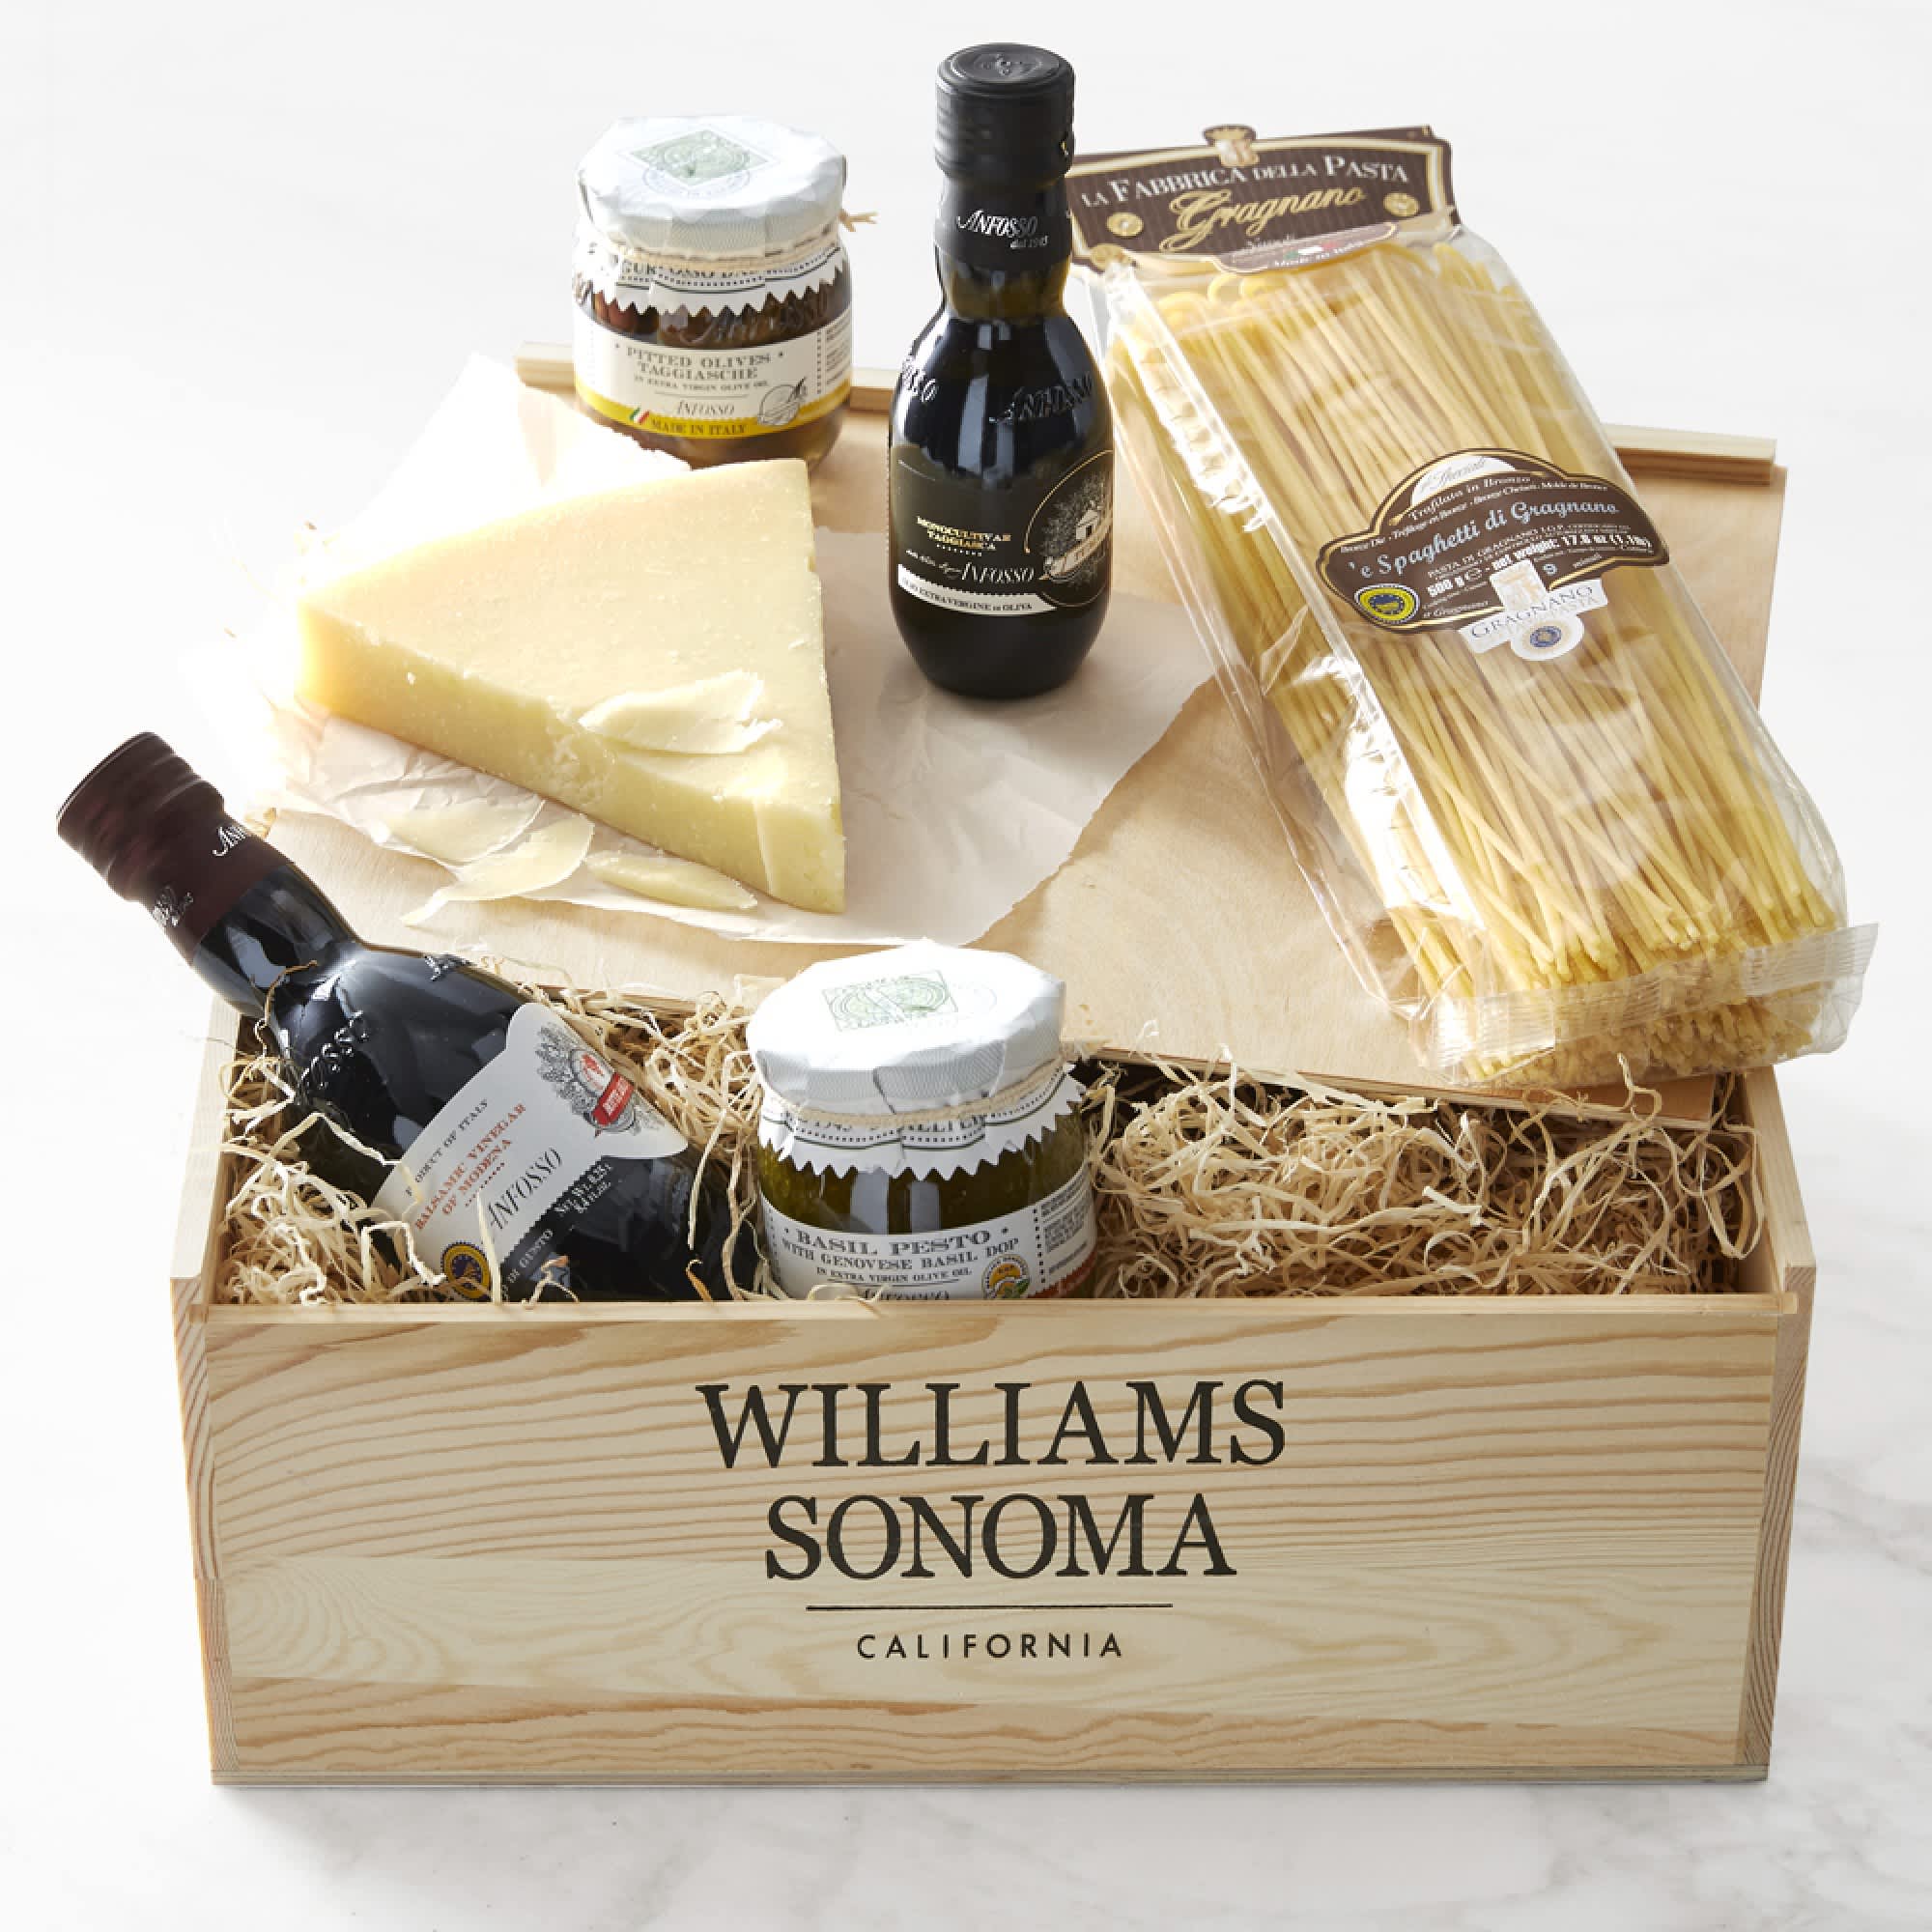 http://cdn.apartmenttherapy.info/image/upload/v1682529751/gen-workflow/product-database/williams-sonoma-italian-pantry-gift-crate.jpg